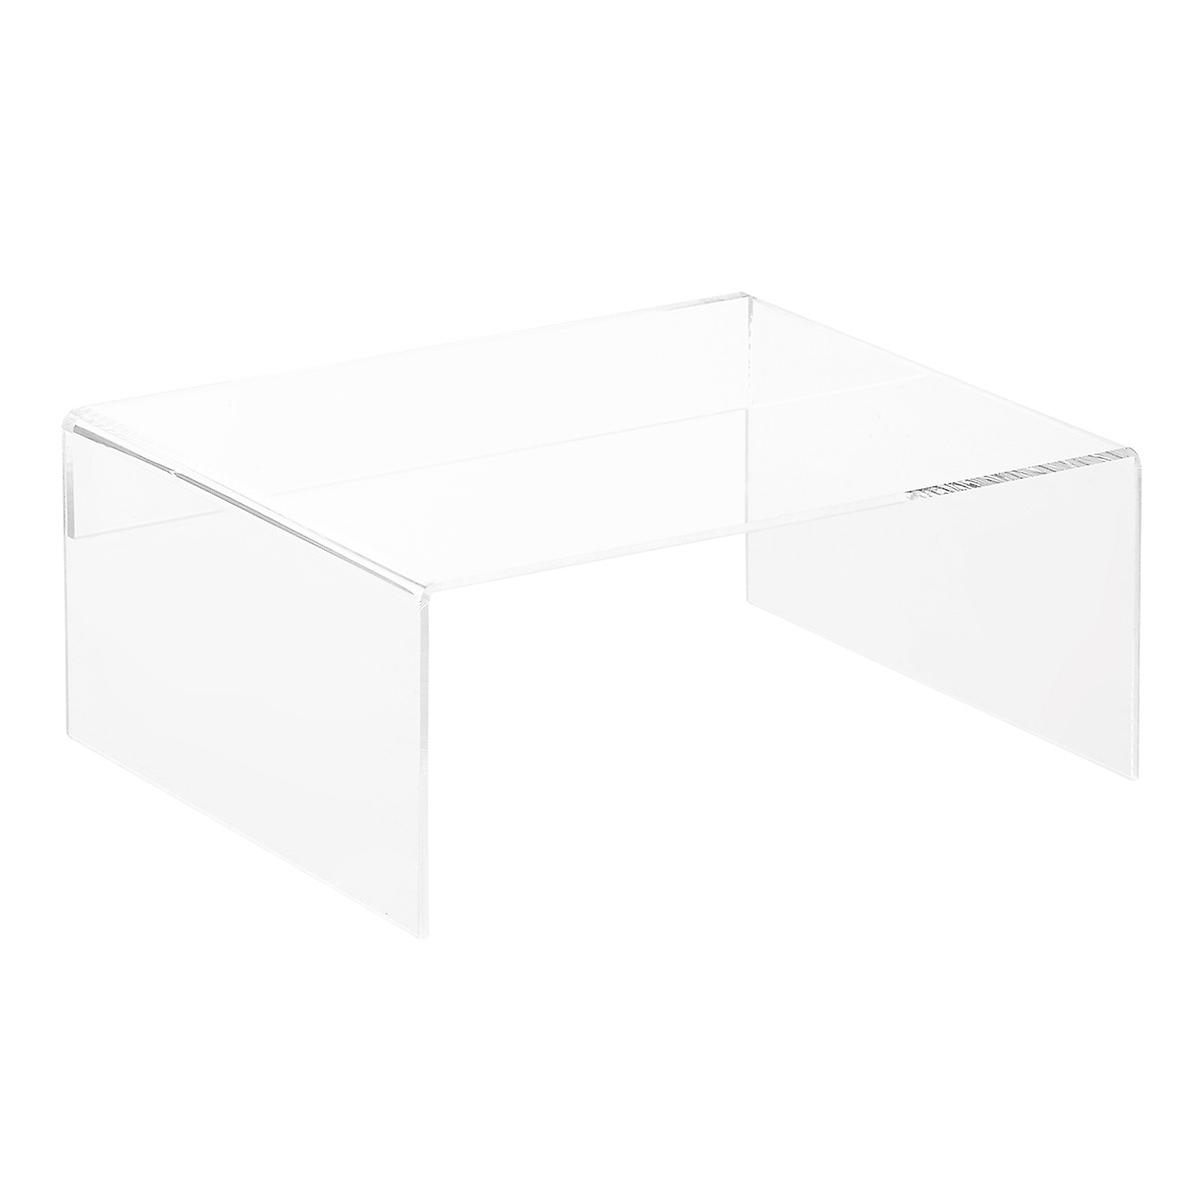 The Container Store Small Acrylic Organizer Shelf